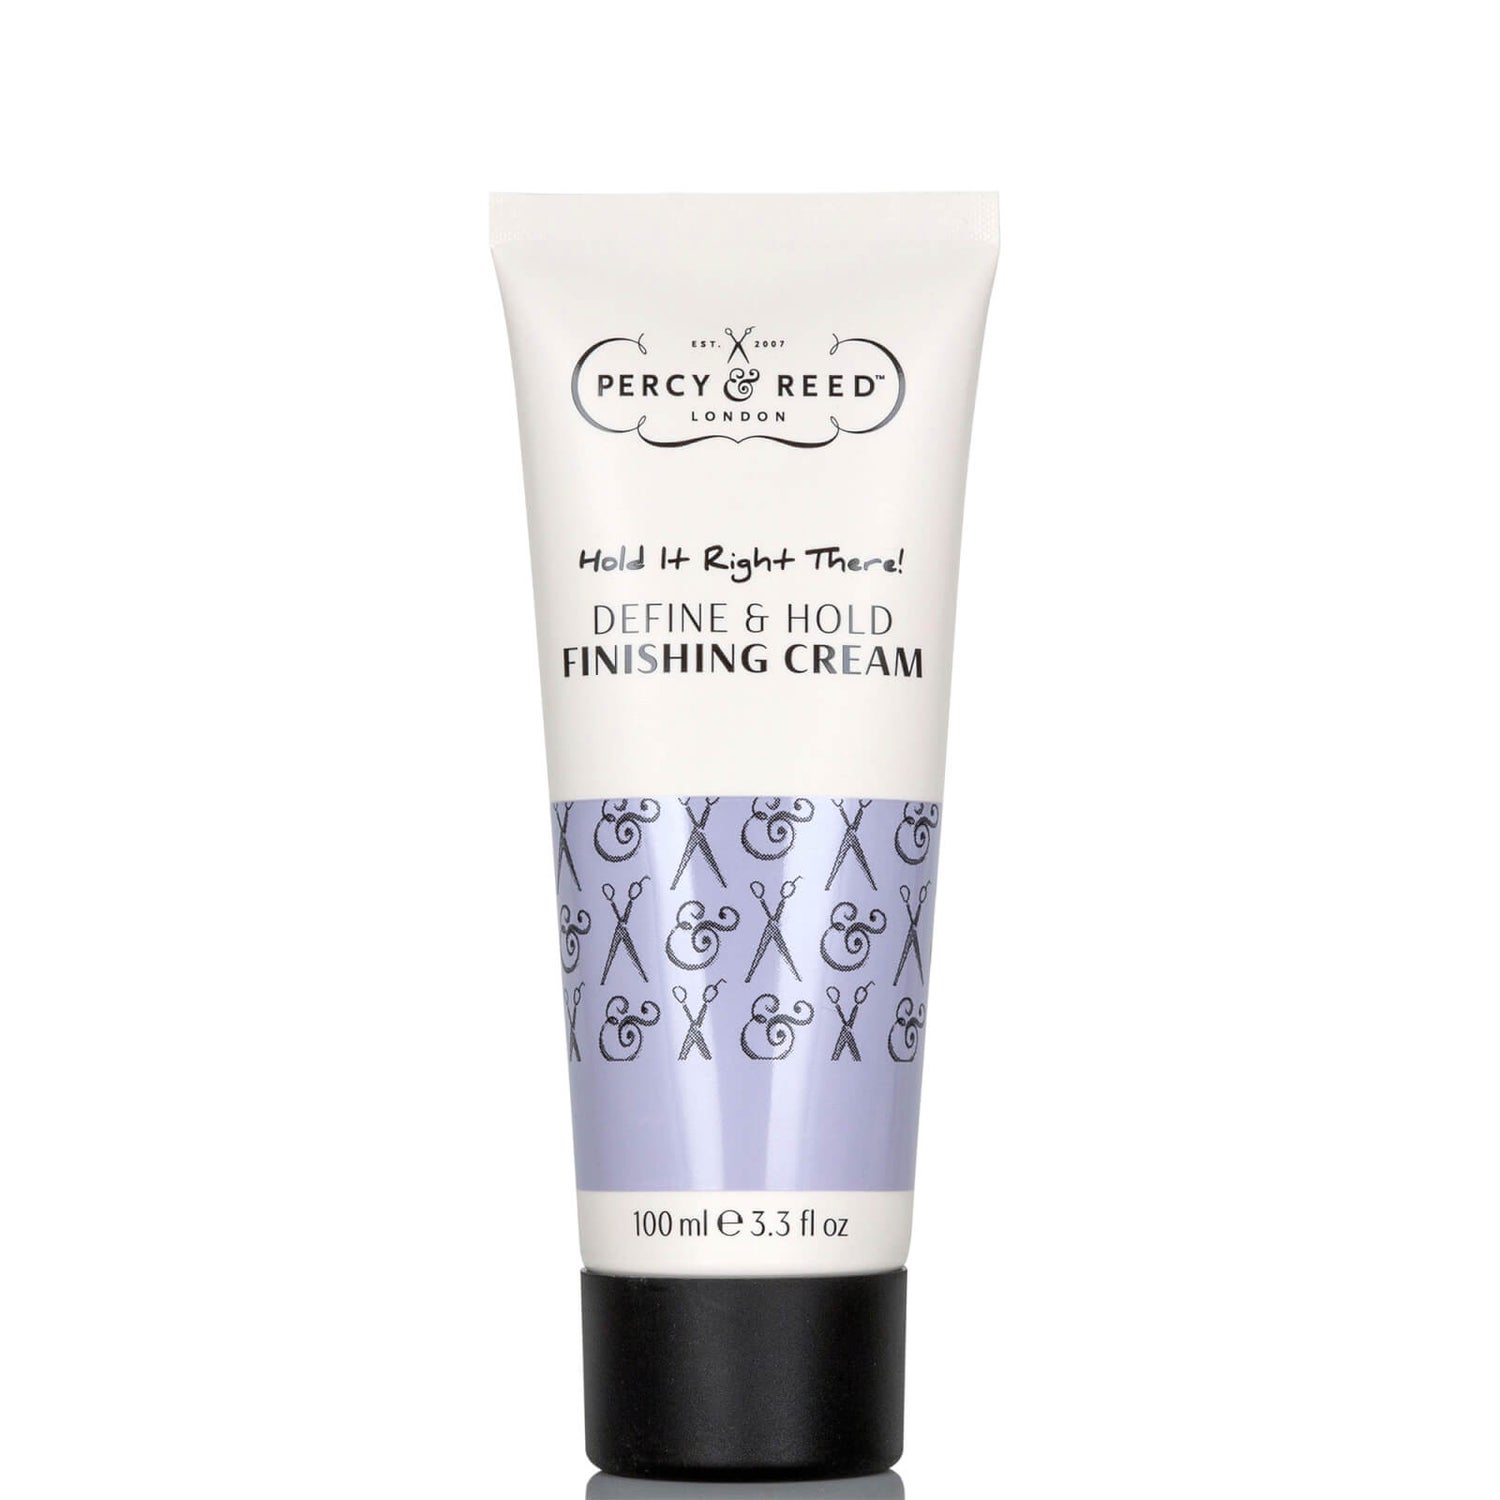 Percy & Reed Hold it Right There! Define and Hold Finishing Cream 100ml